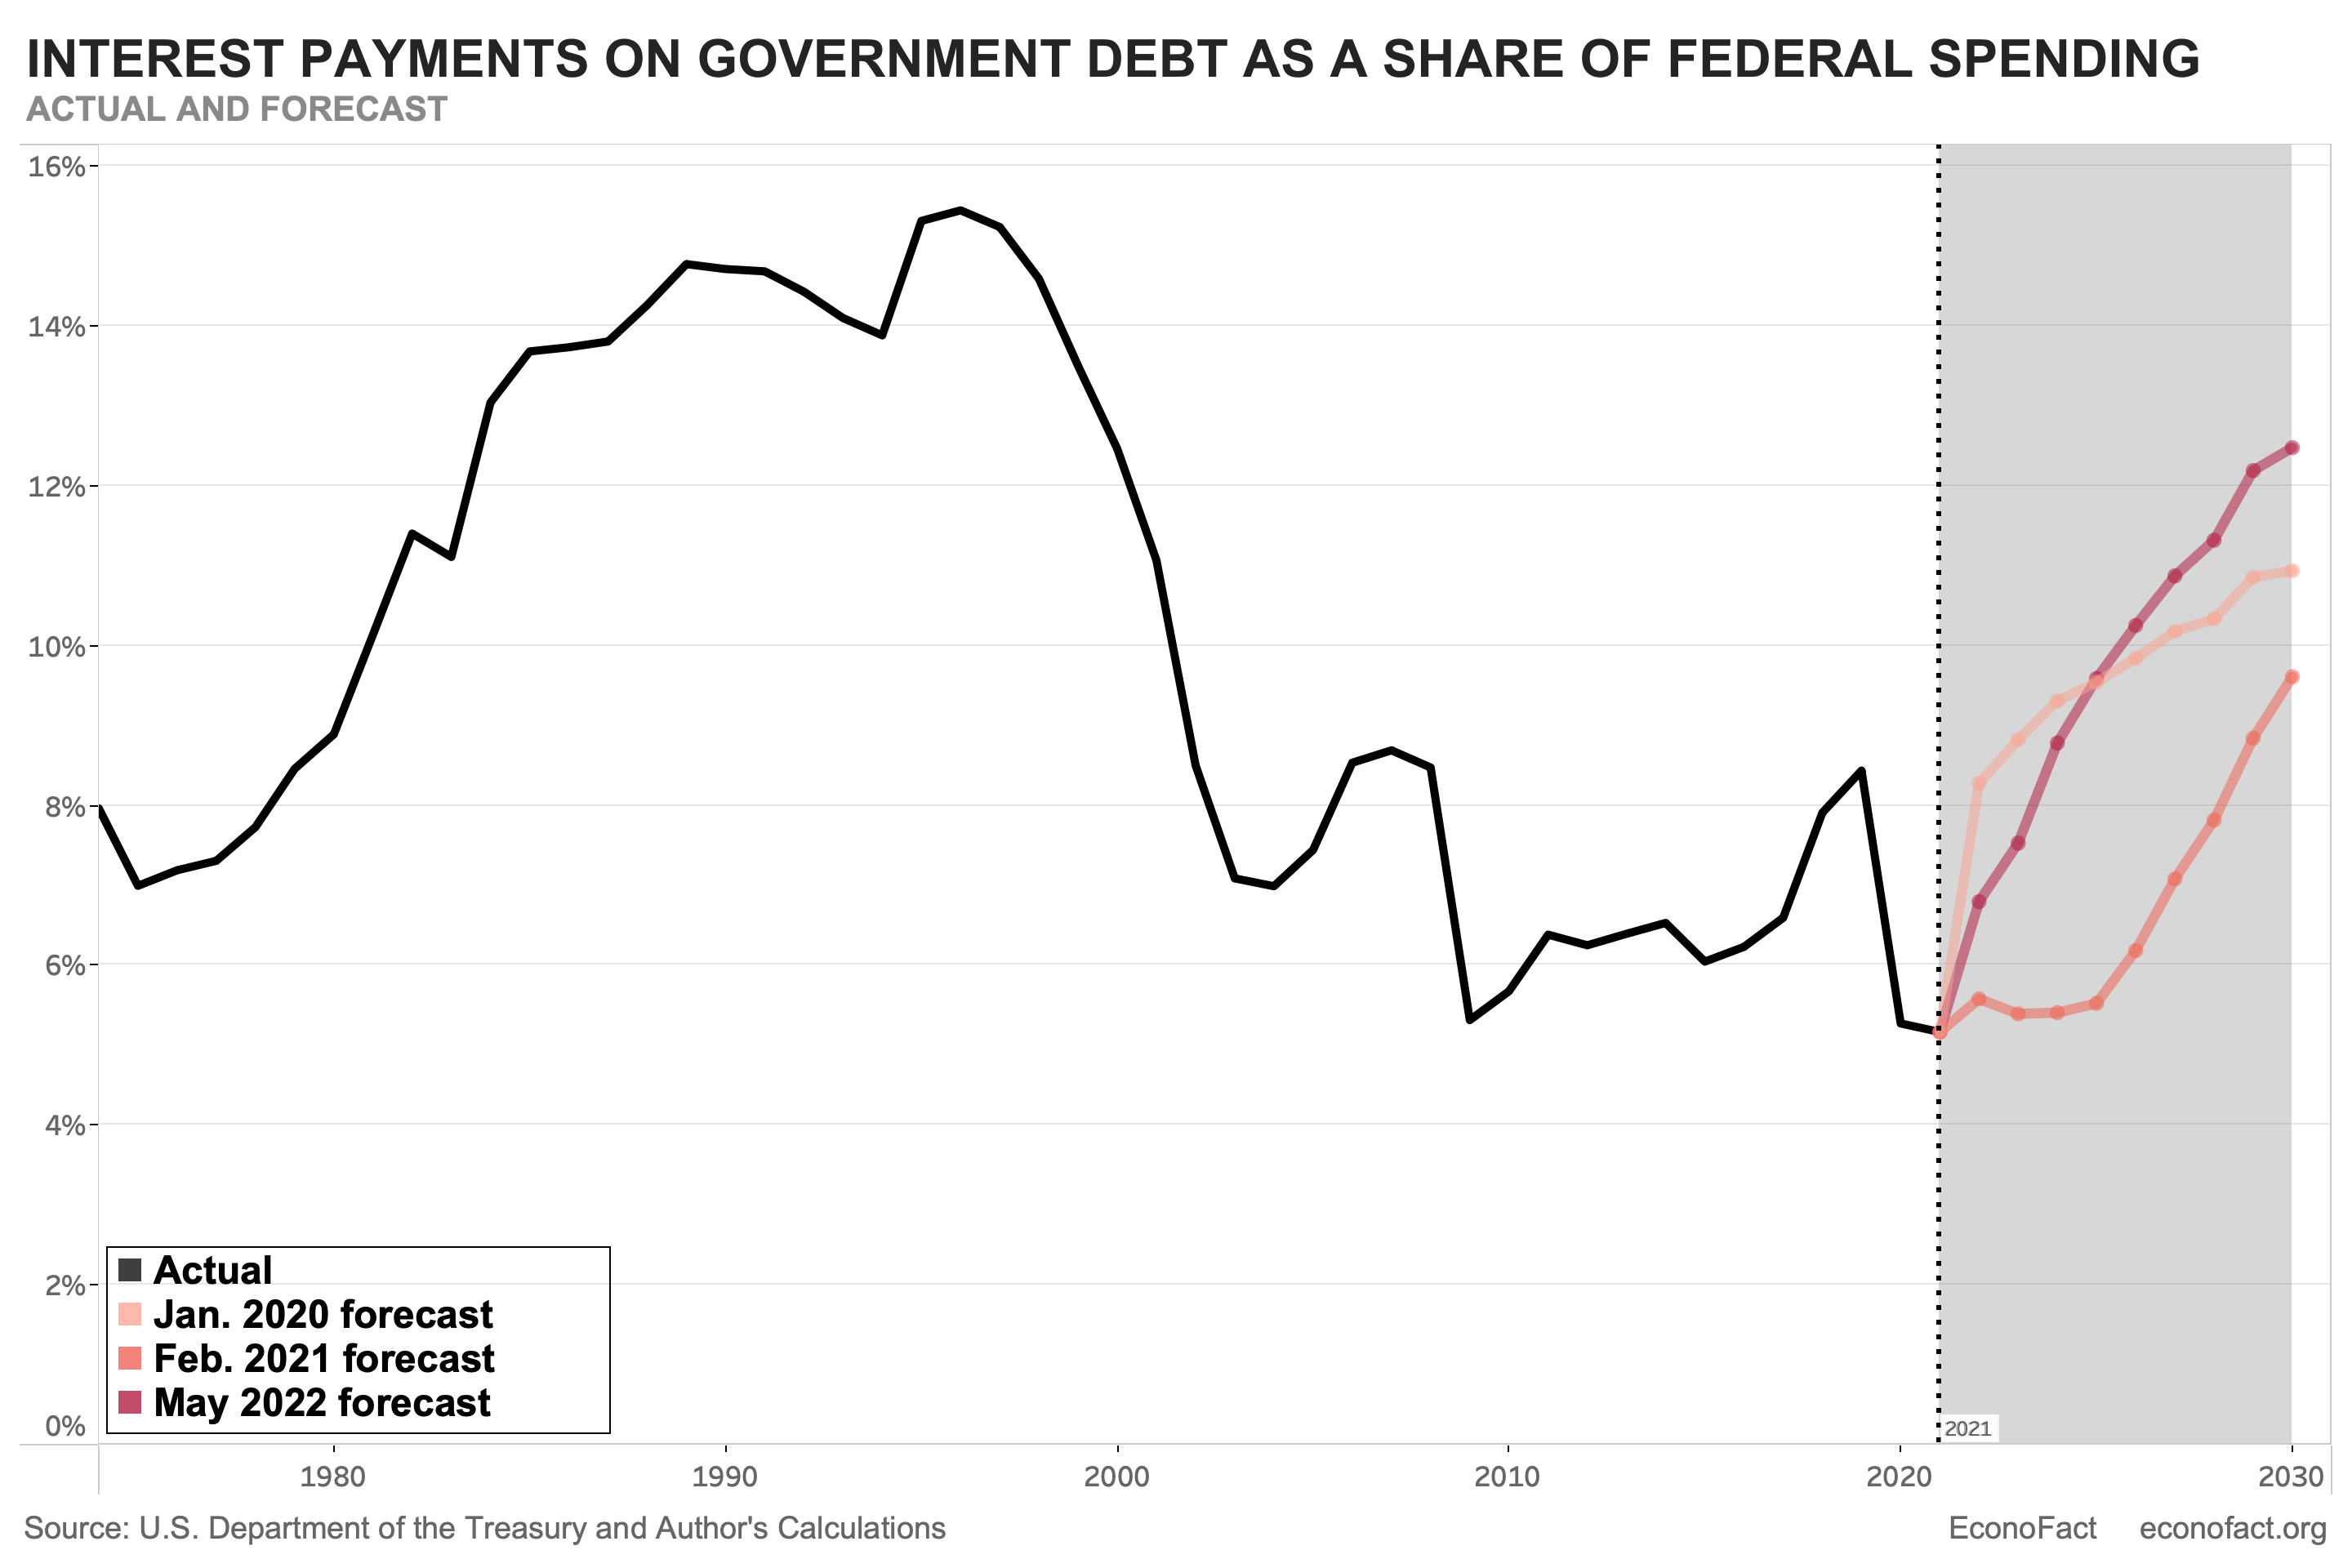 Graph of actual interest payments on government debt as a share of Federal spending, 1974-2020, and Jan 2020, Feb 2021 and May 2022 forecasts through 2030.